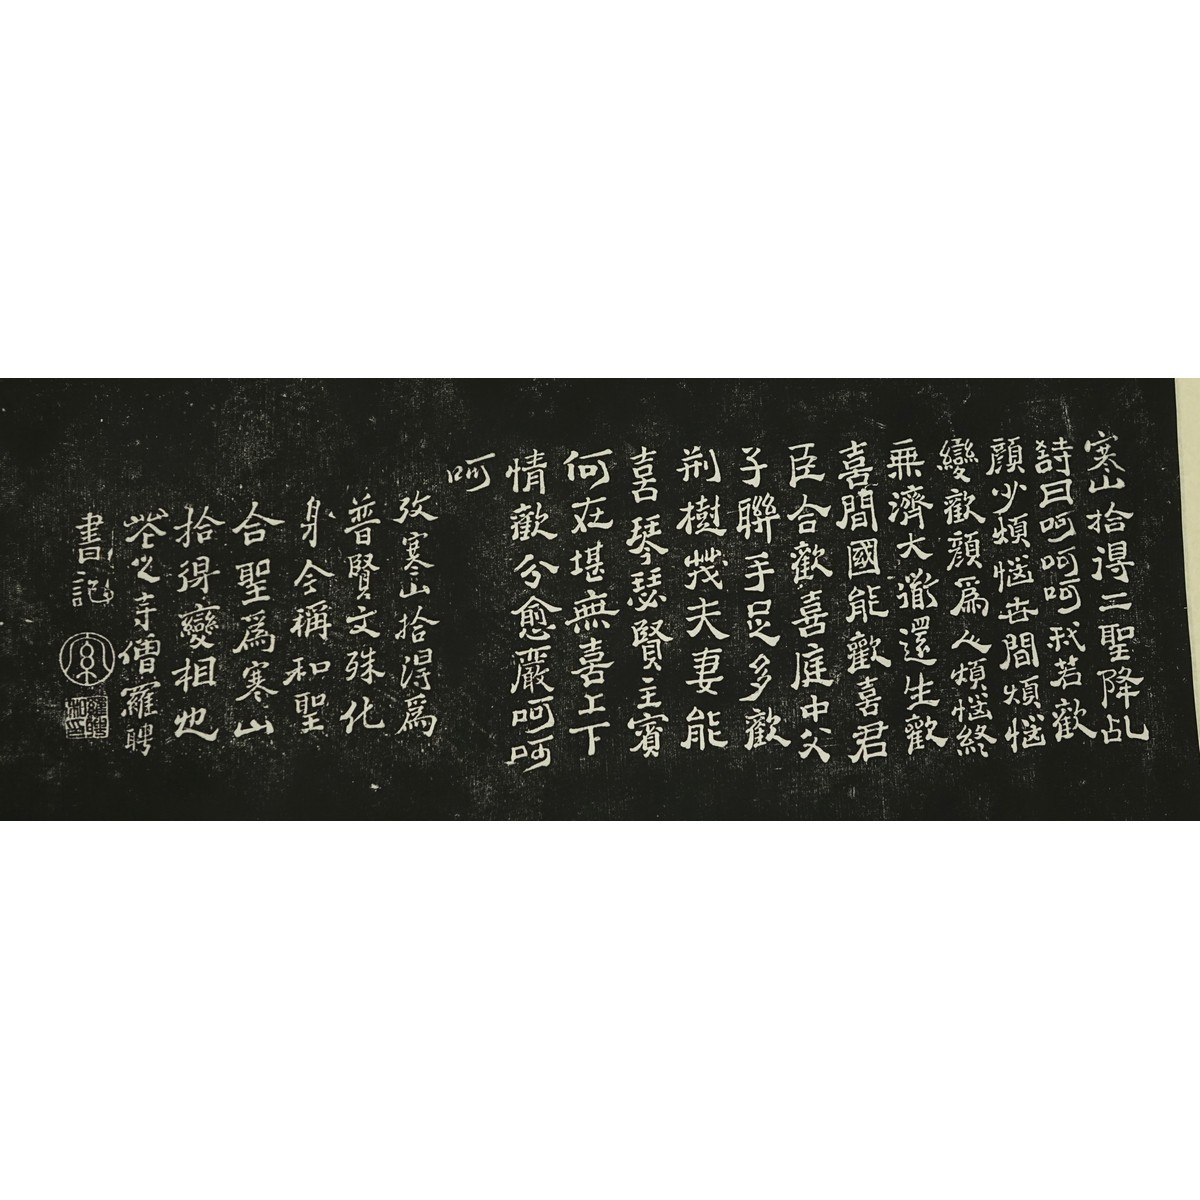 Chinese Scroll Painting of a Stone Rubbing, Monks Hanshan and Shide,  Calligraphy Panel of a Poem Above. Signed on obverse side of the scroll and box.